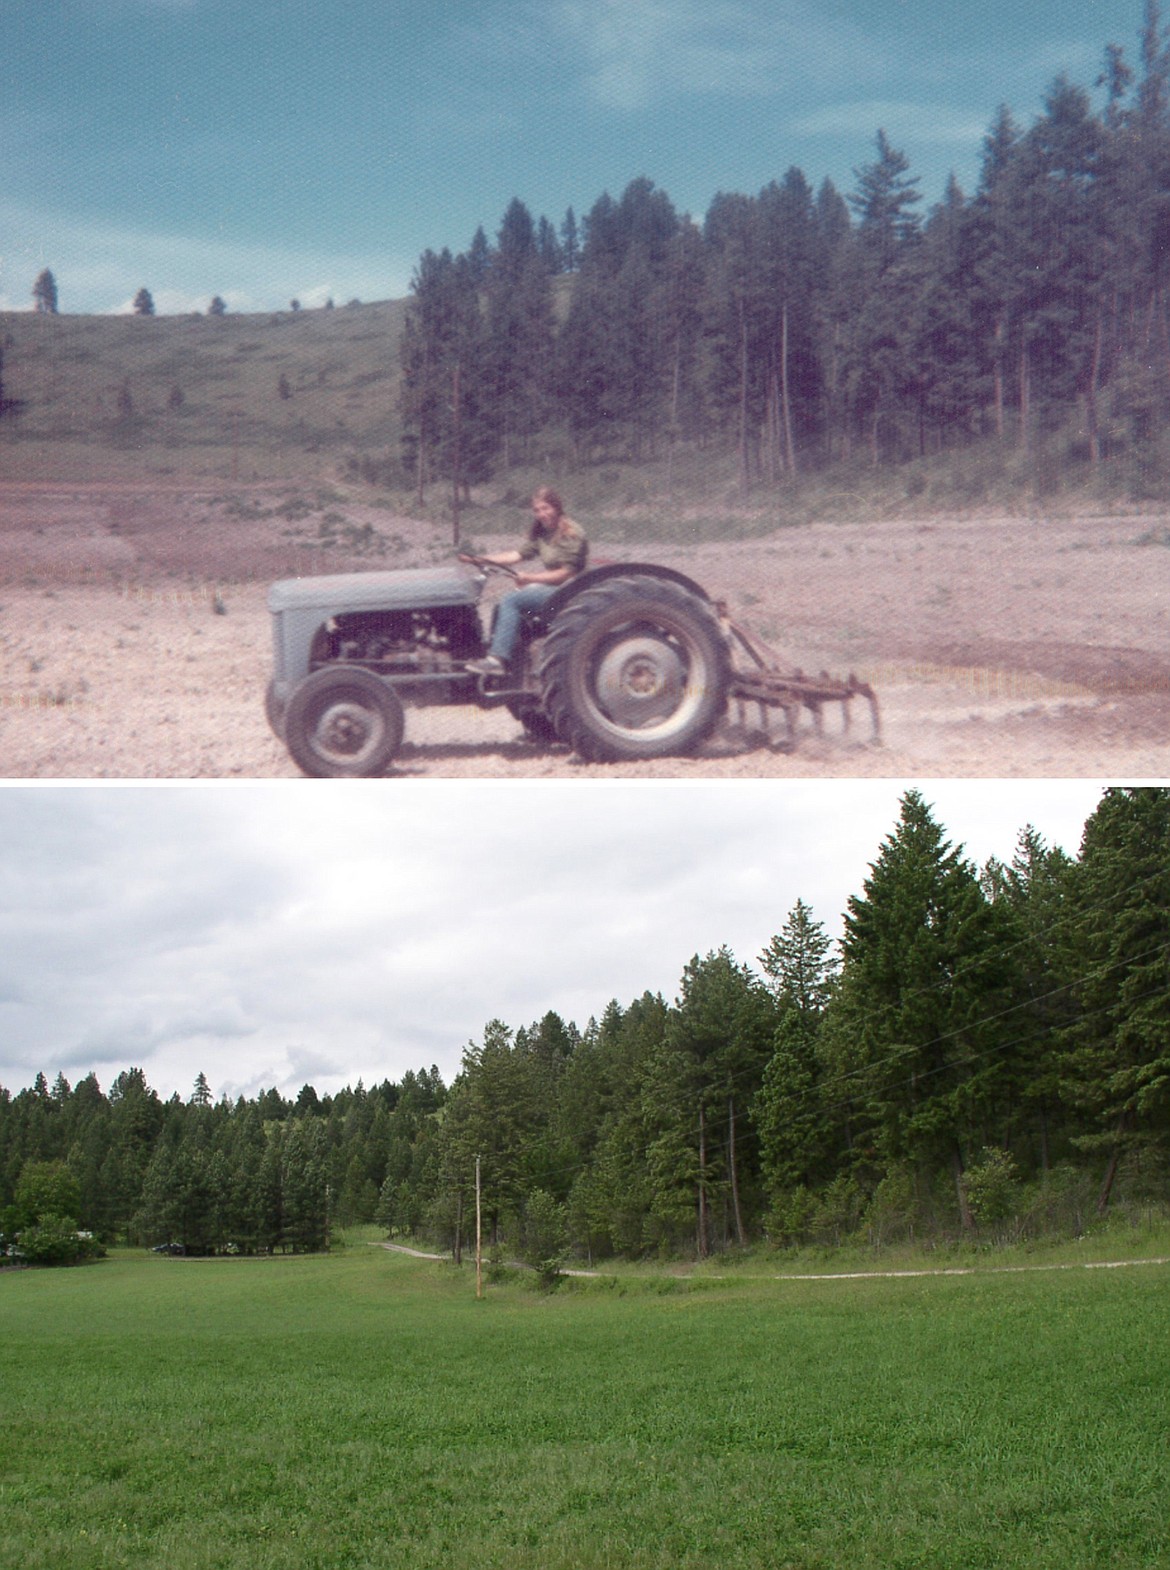 Views of Chapman Hill taken along Hogue Drive in 1970 (above) and 2004 (below) show how 34 years of vegetation growth can change the landscape. (photos provided)